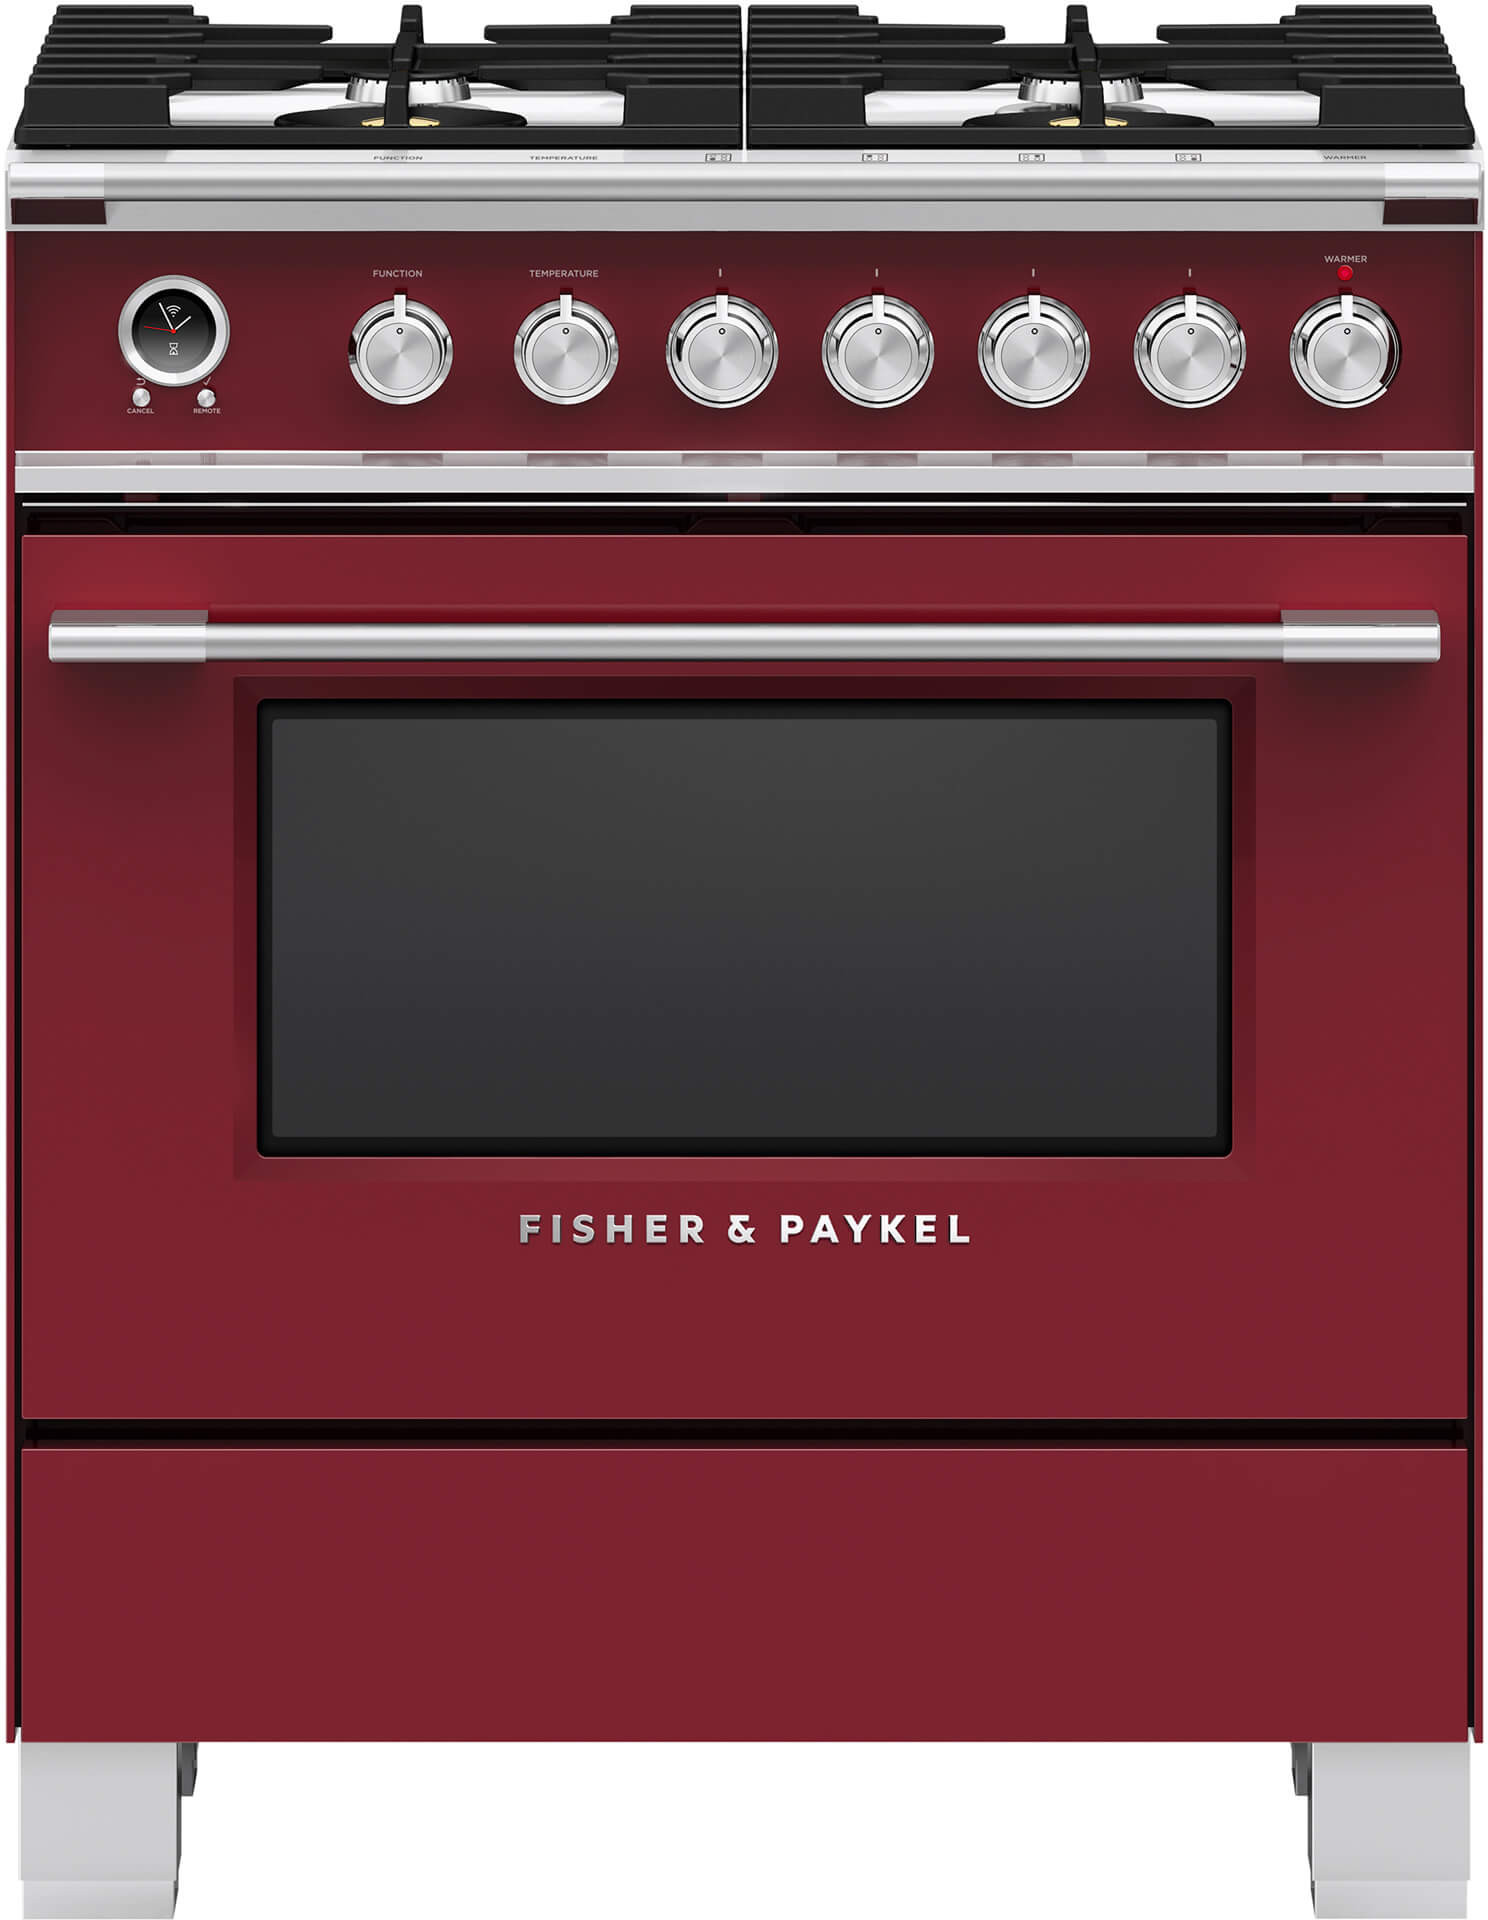 Fisher & Paykel Series 9 classic 30 Freestanding Dual Fuel Natural Gas Range OR30SCG6R1